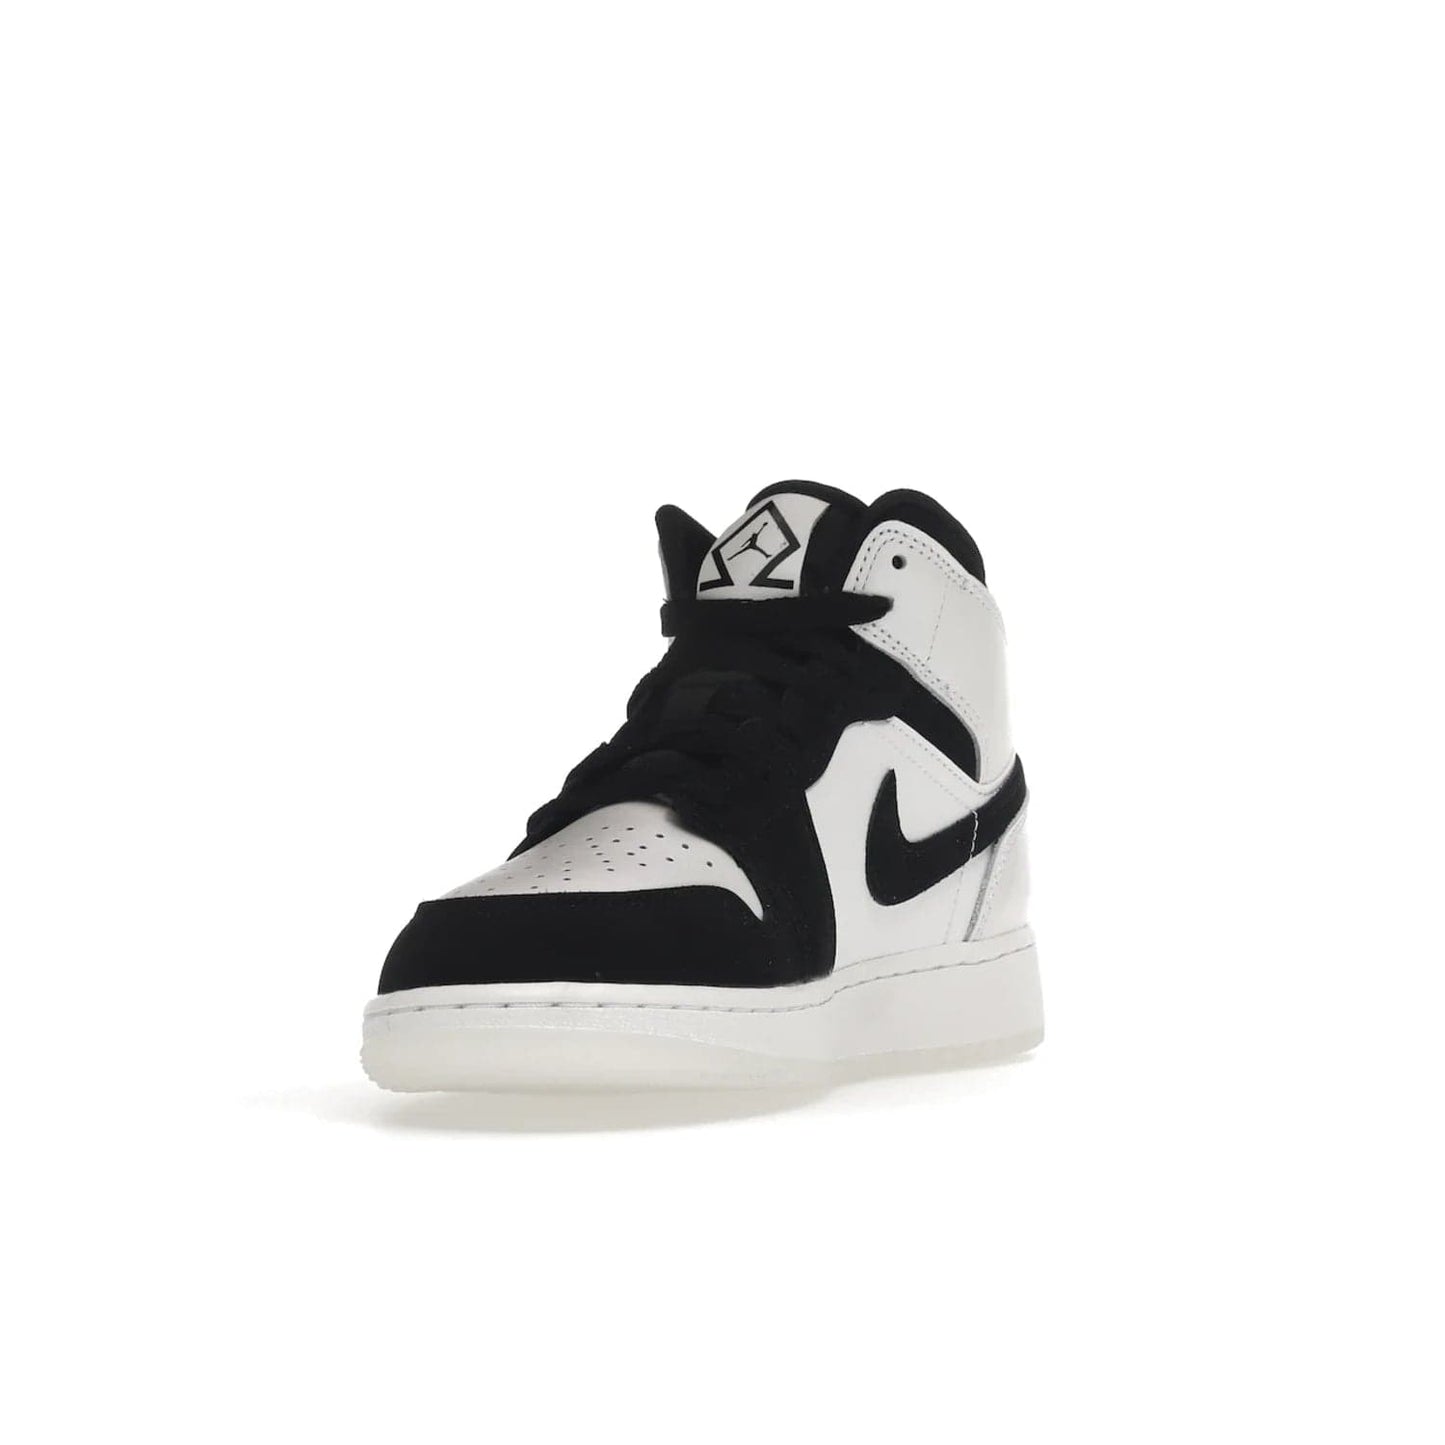 Jordan 1 Mid Diamond Shorts (GS) - Image 13 - Only at www.BallersClubKickz.com - Get the Jordan 1 Mid Diamond Shorts GS on 9th Feb 2022! Features a white, black & suede design with nylon tongue, stamped wings logo, rubber midsole & outsole. Only $100!